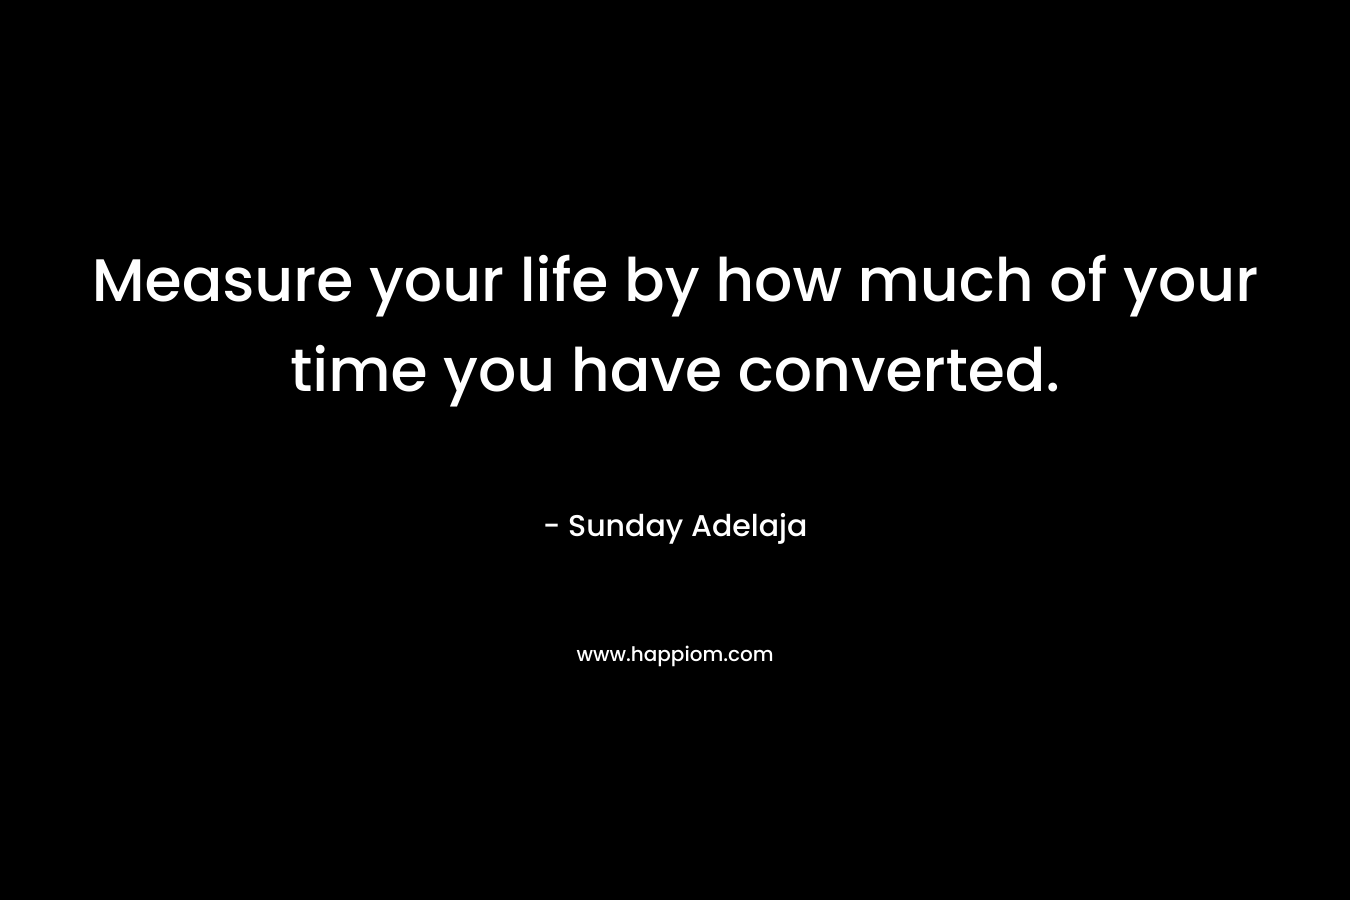 Measure your life by how much of your time you have converted.